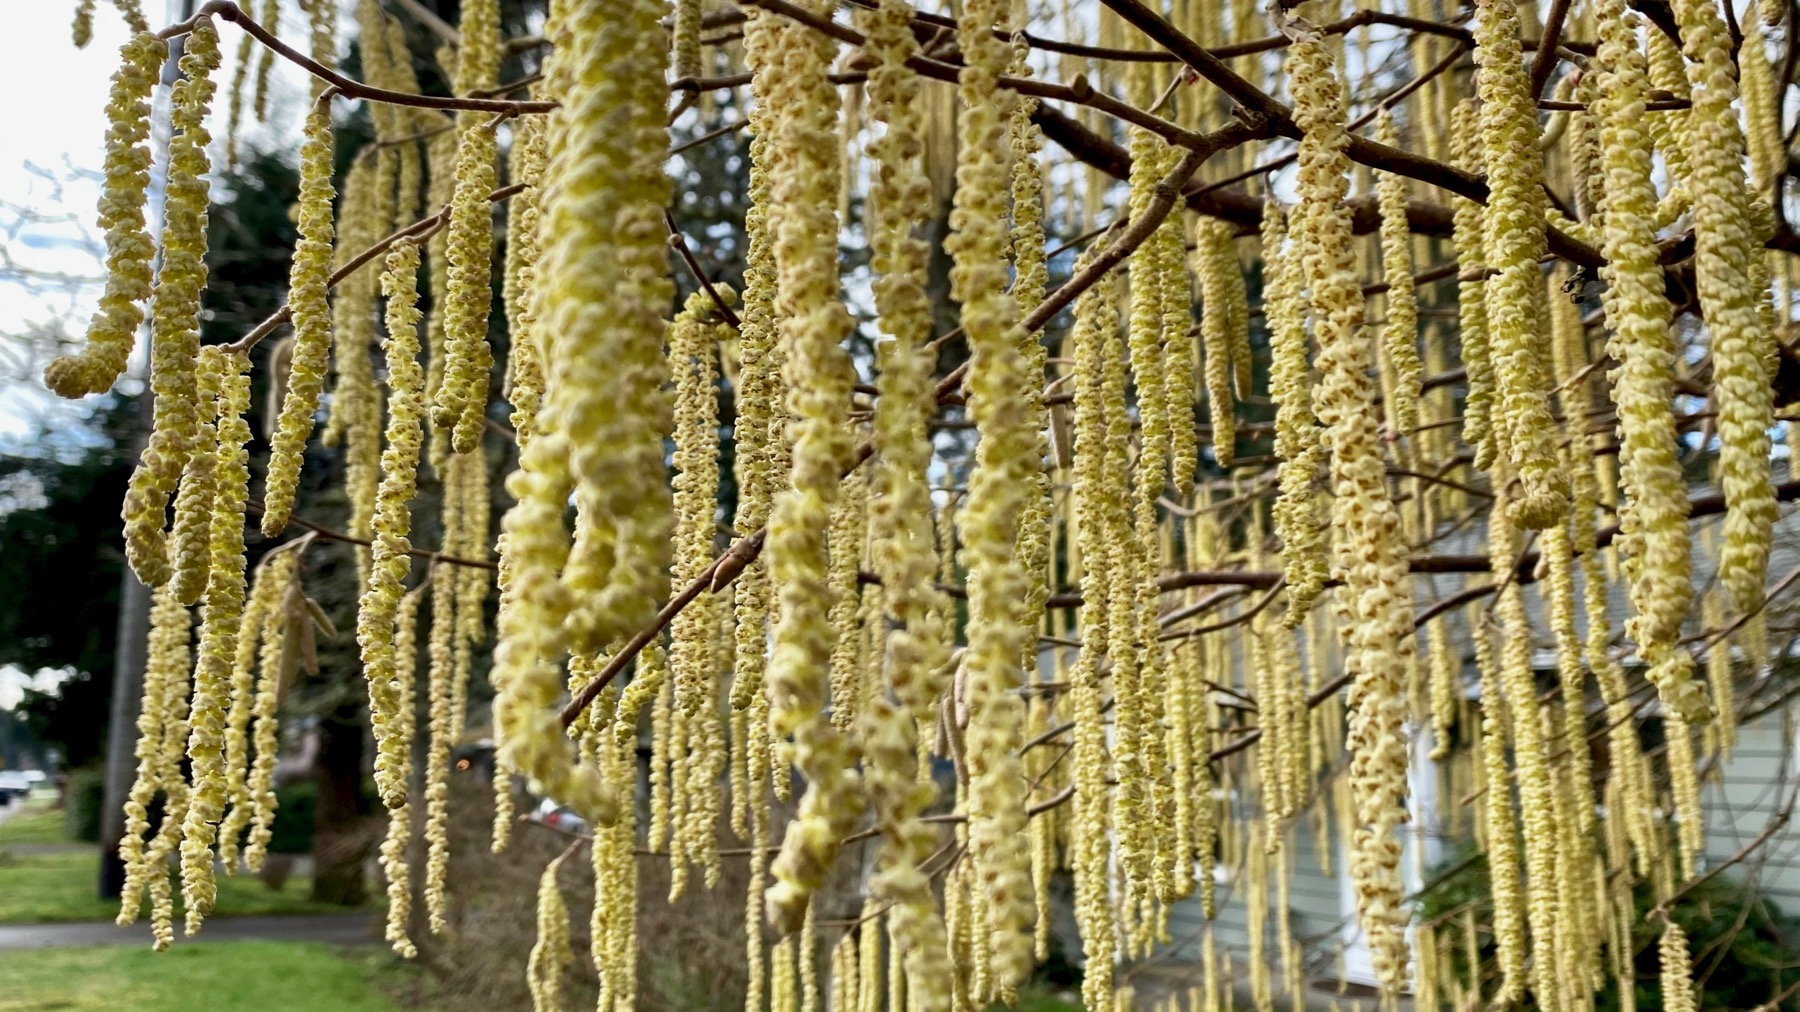 Catkins maybe